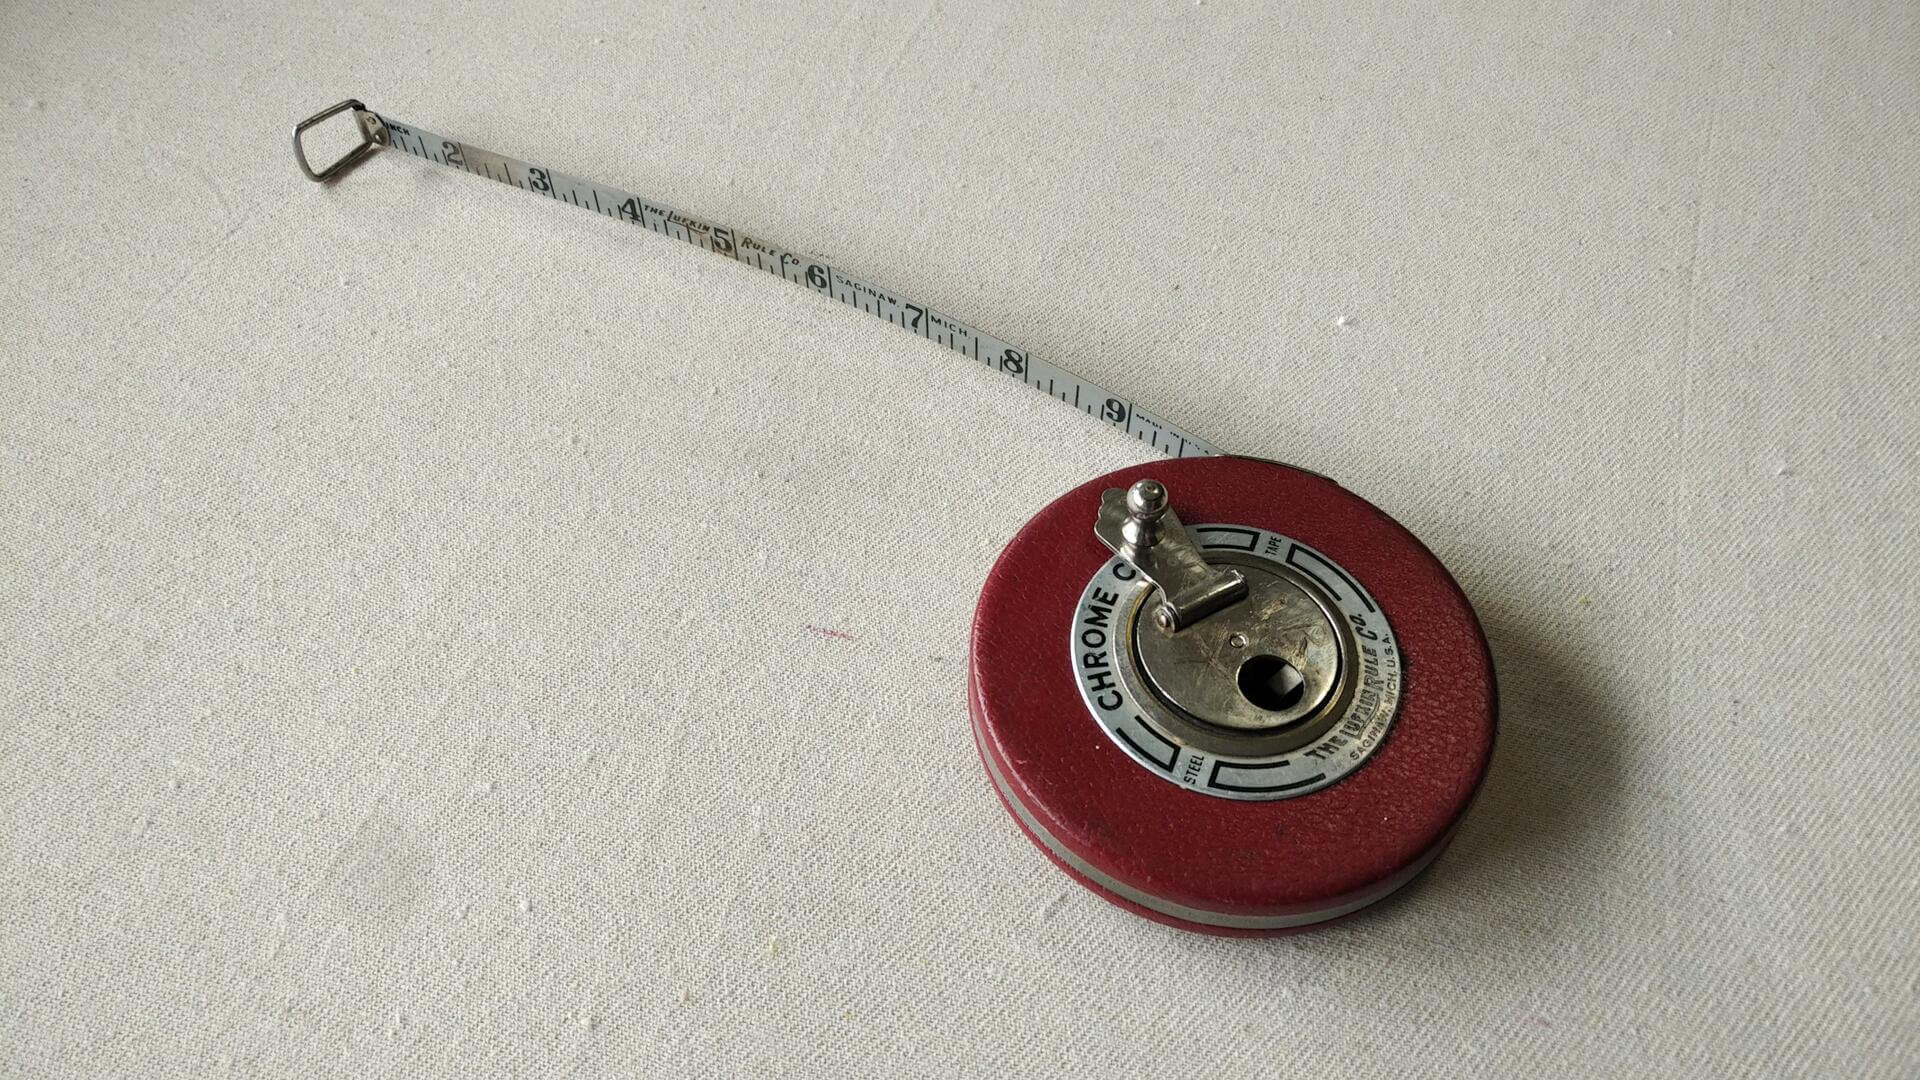 Nice vintage 50′ chrome clad steel tape measure by Lufkin Rule Co. from Saginaw, MI in red leather case. Antique made in both USA collectible marking and measuring tool. Note previous owner engraved name and address on the tape rim.